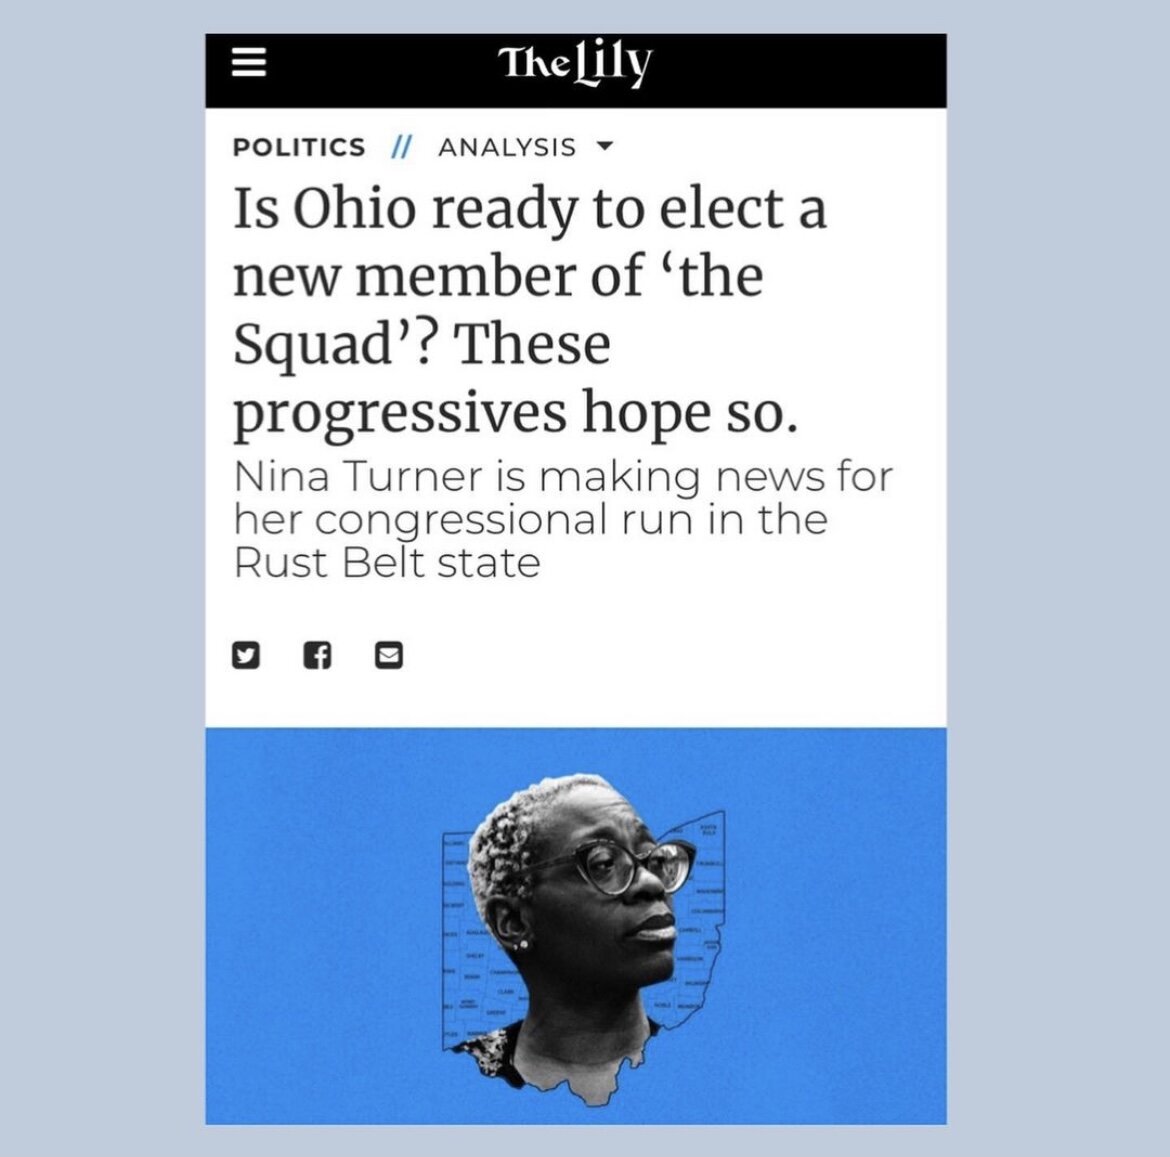  Article in The Lily: Is Ohio ready to elect a new member of ‘the Squad’? These progressives hope so. 